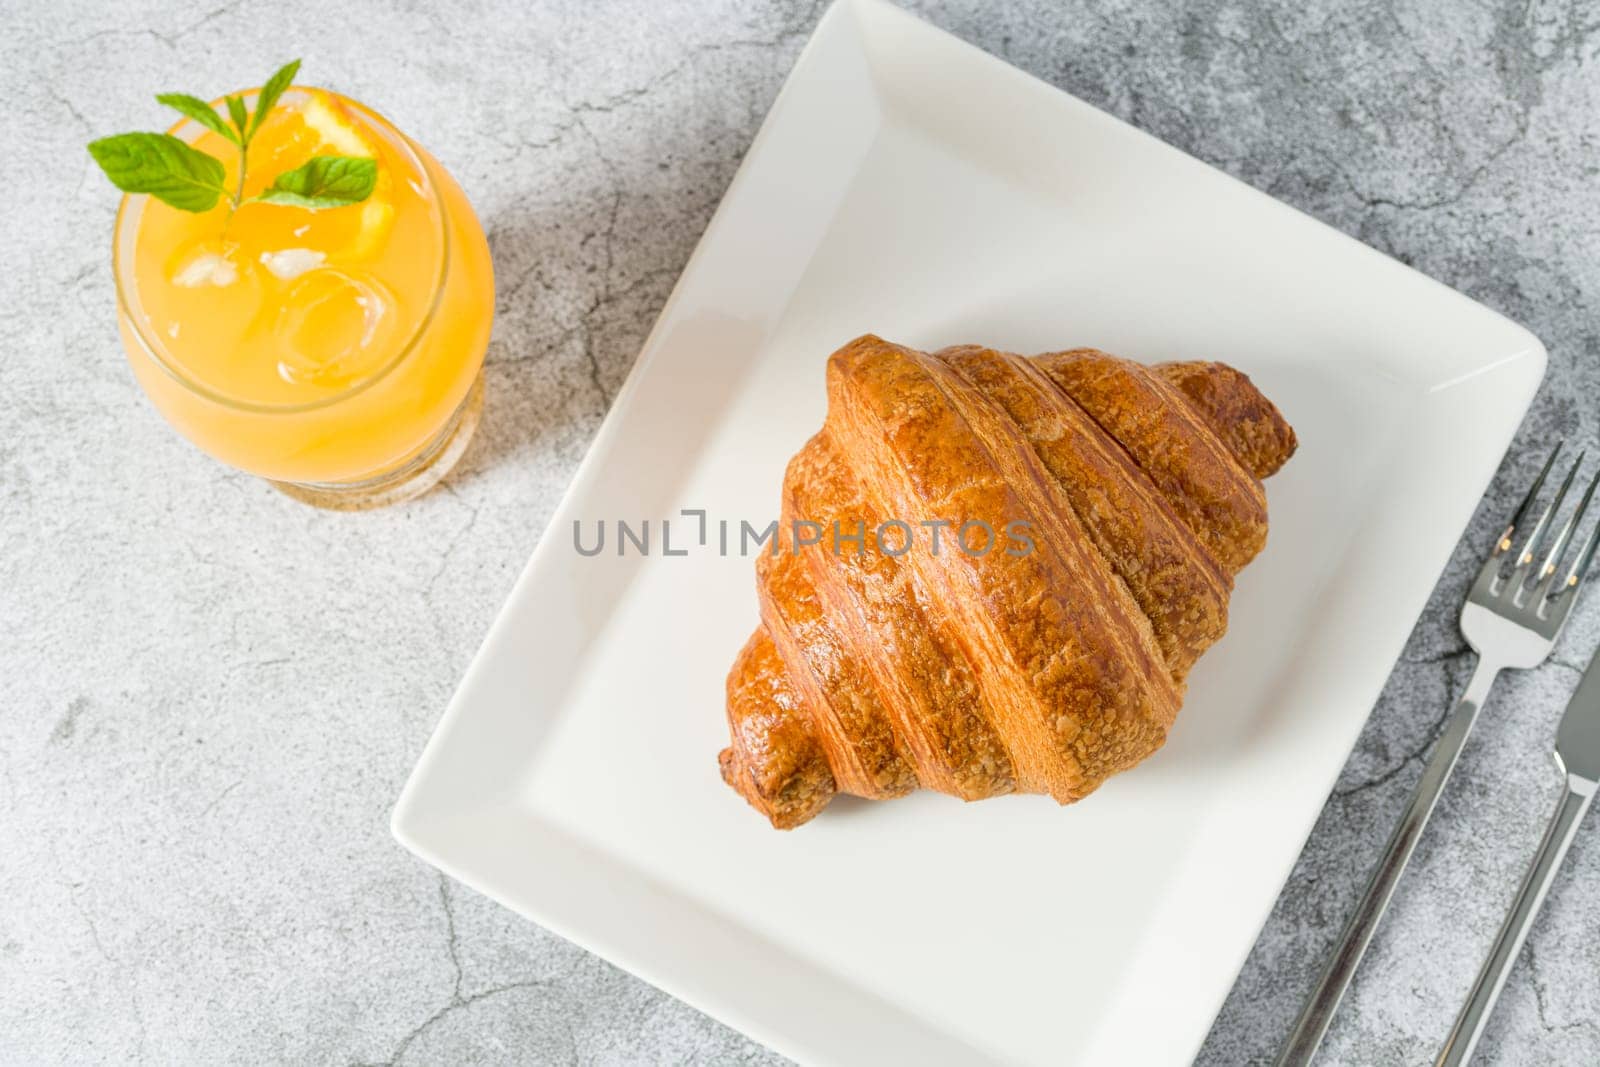 Croissant on a white porcelain plate with freshly squeezed orange juice on the side